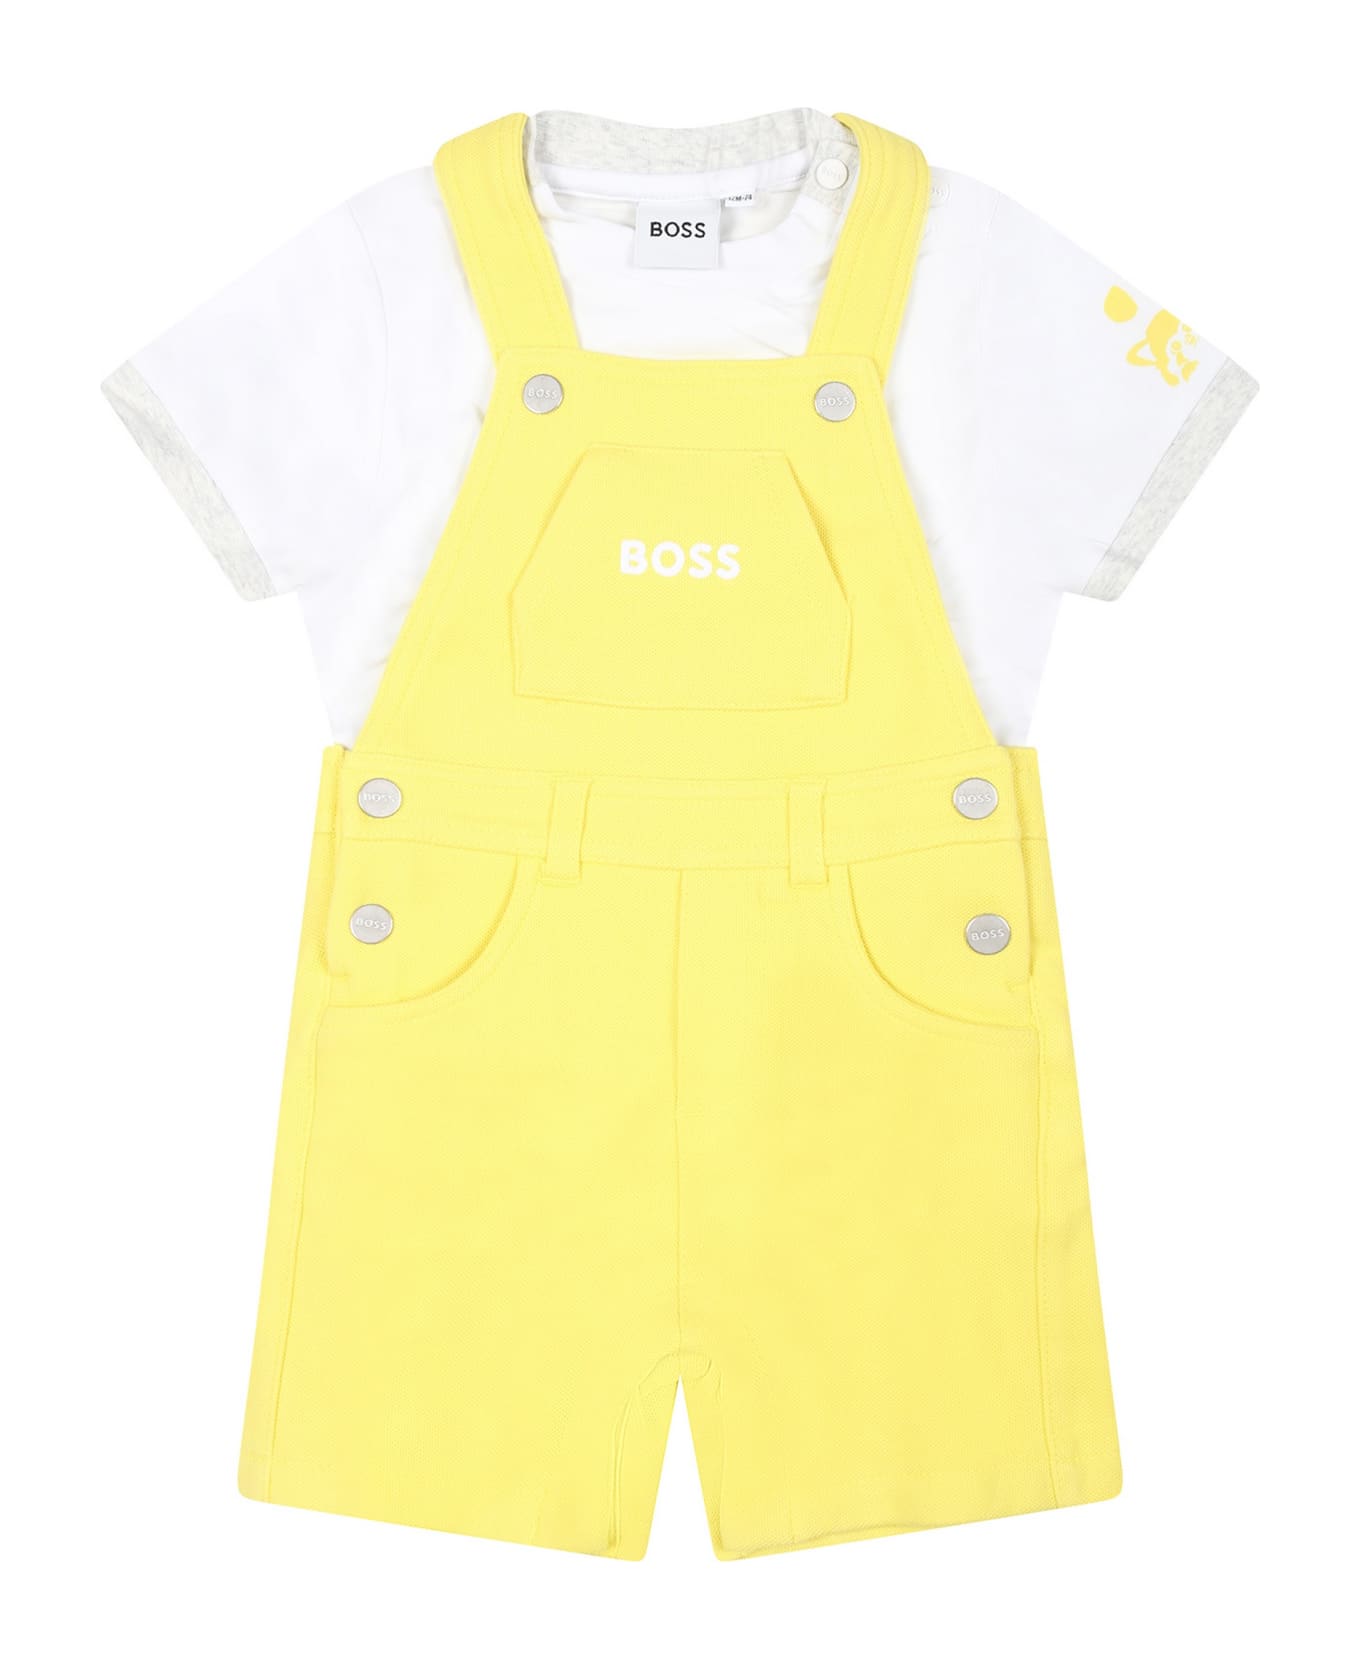 Hugo Boss Yellow Suit For Baby Boy With Logo - Yellow